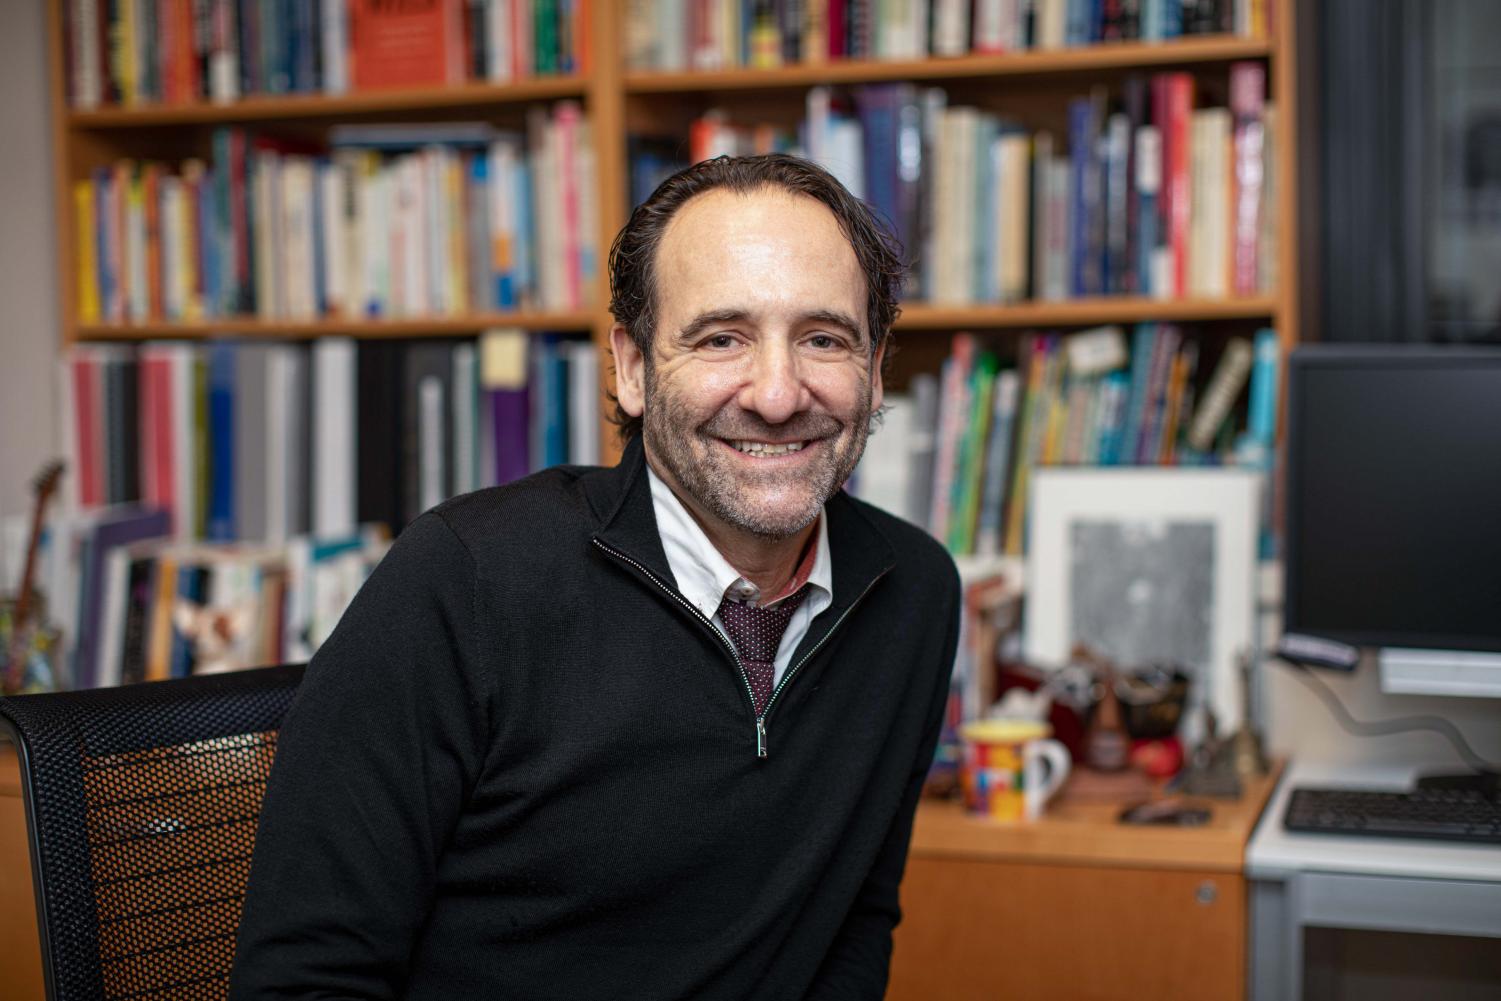 A portrait of Dr. Jess Shatkin in his office. He is sitting in a desk chair in front of a crowded bookshelf. He is wearing a black quarter-zip sweatshirt, a white collared shirt and a maroon tie.